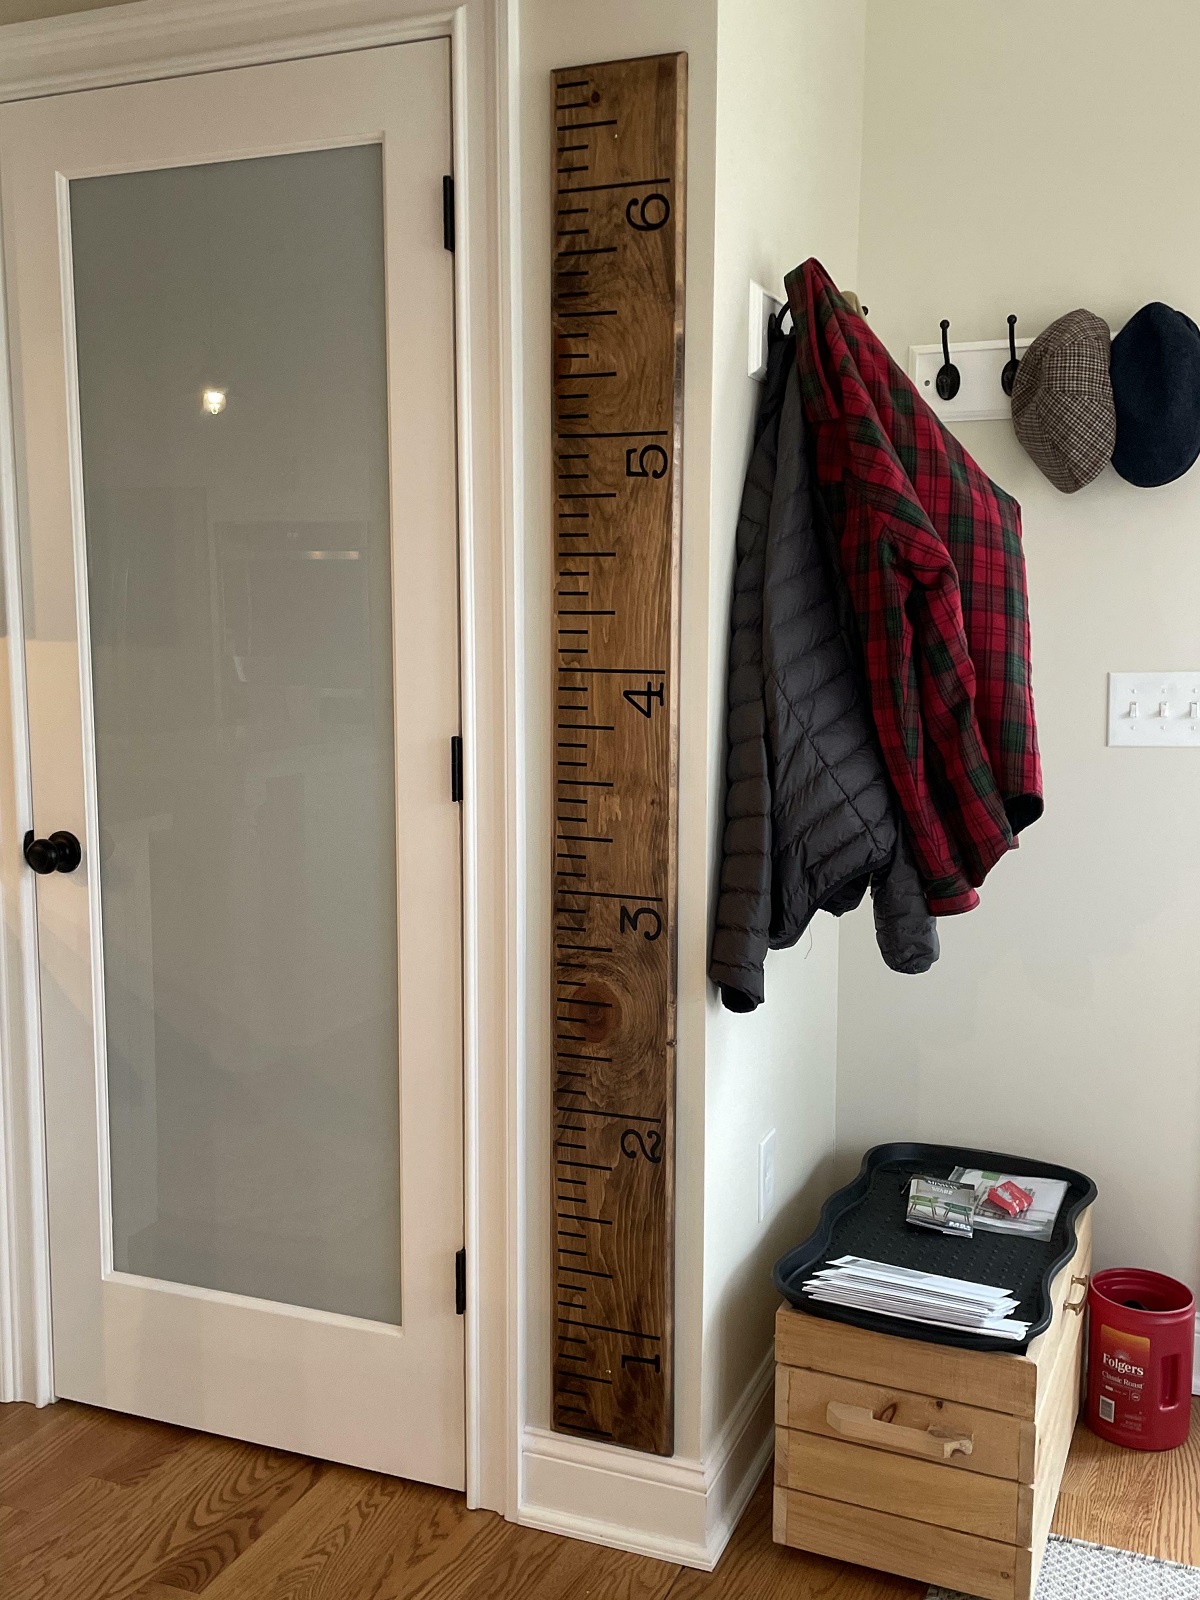 Made A Wall Ruler To Track My Grandchildren's Growth